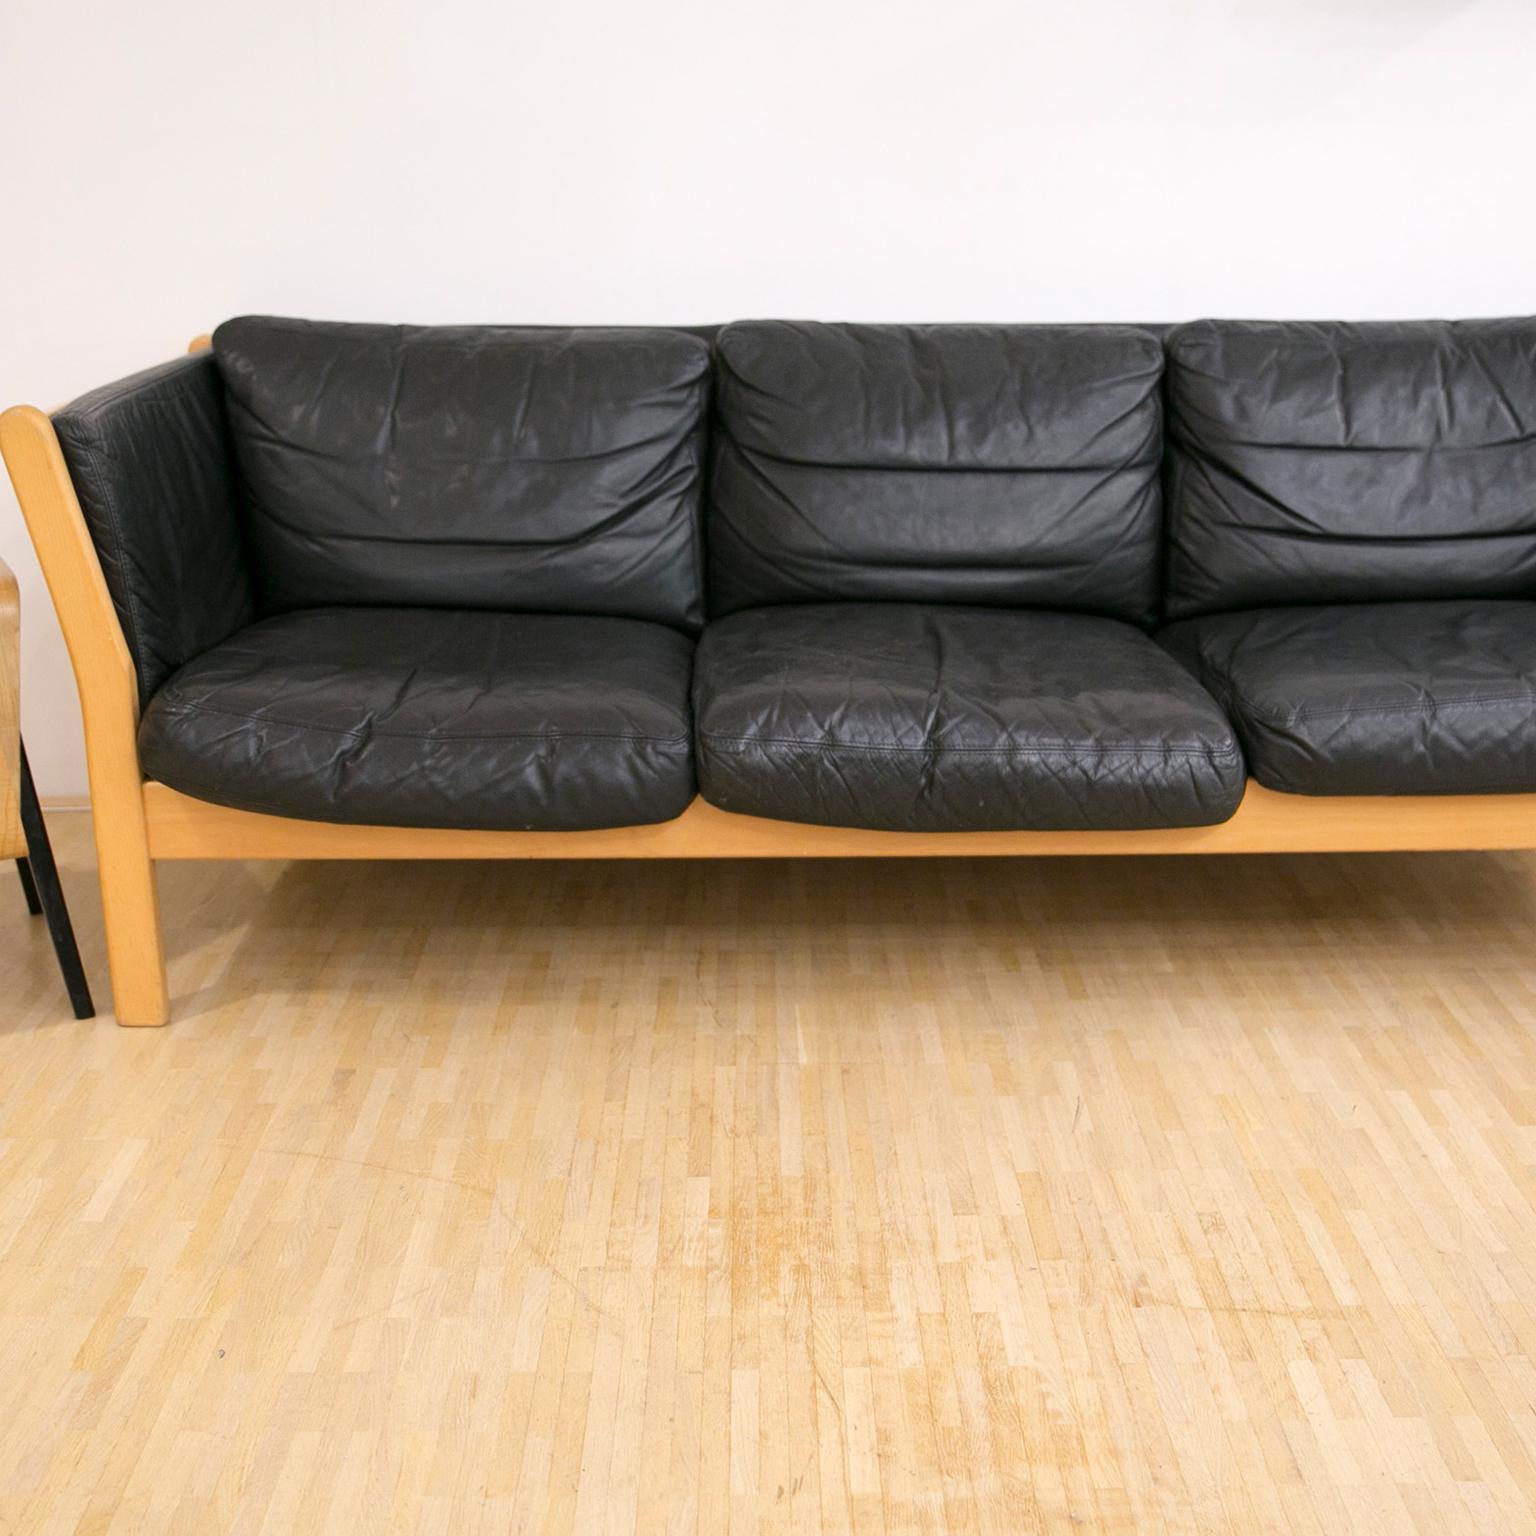 A Classic three-seat in black patinated leather. Classic, solid and timeless piece of design from Denmark.

Measures: H 70 cm x W 208 cm x D 80 cm.